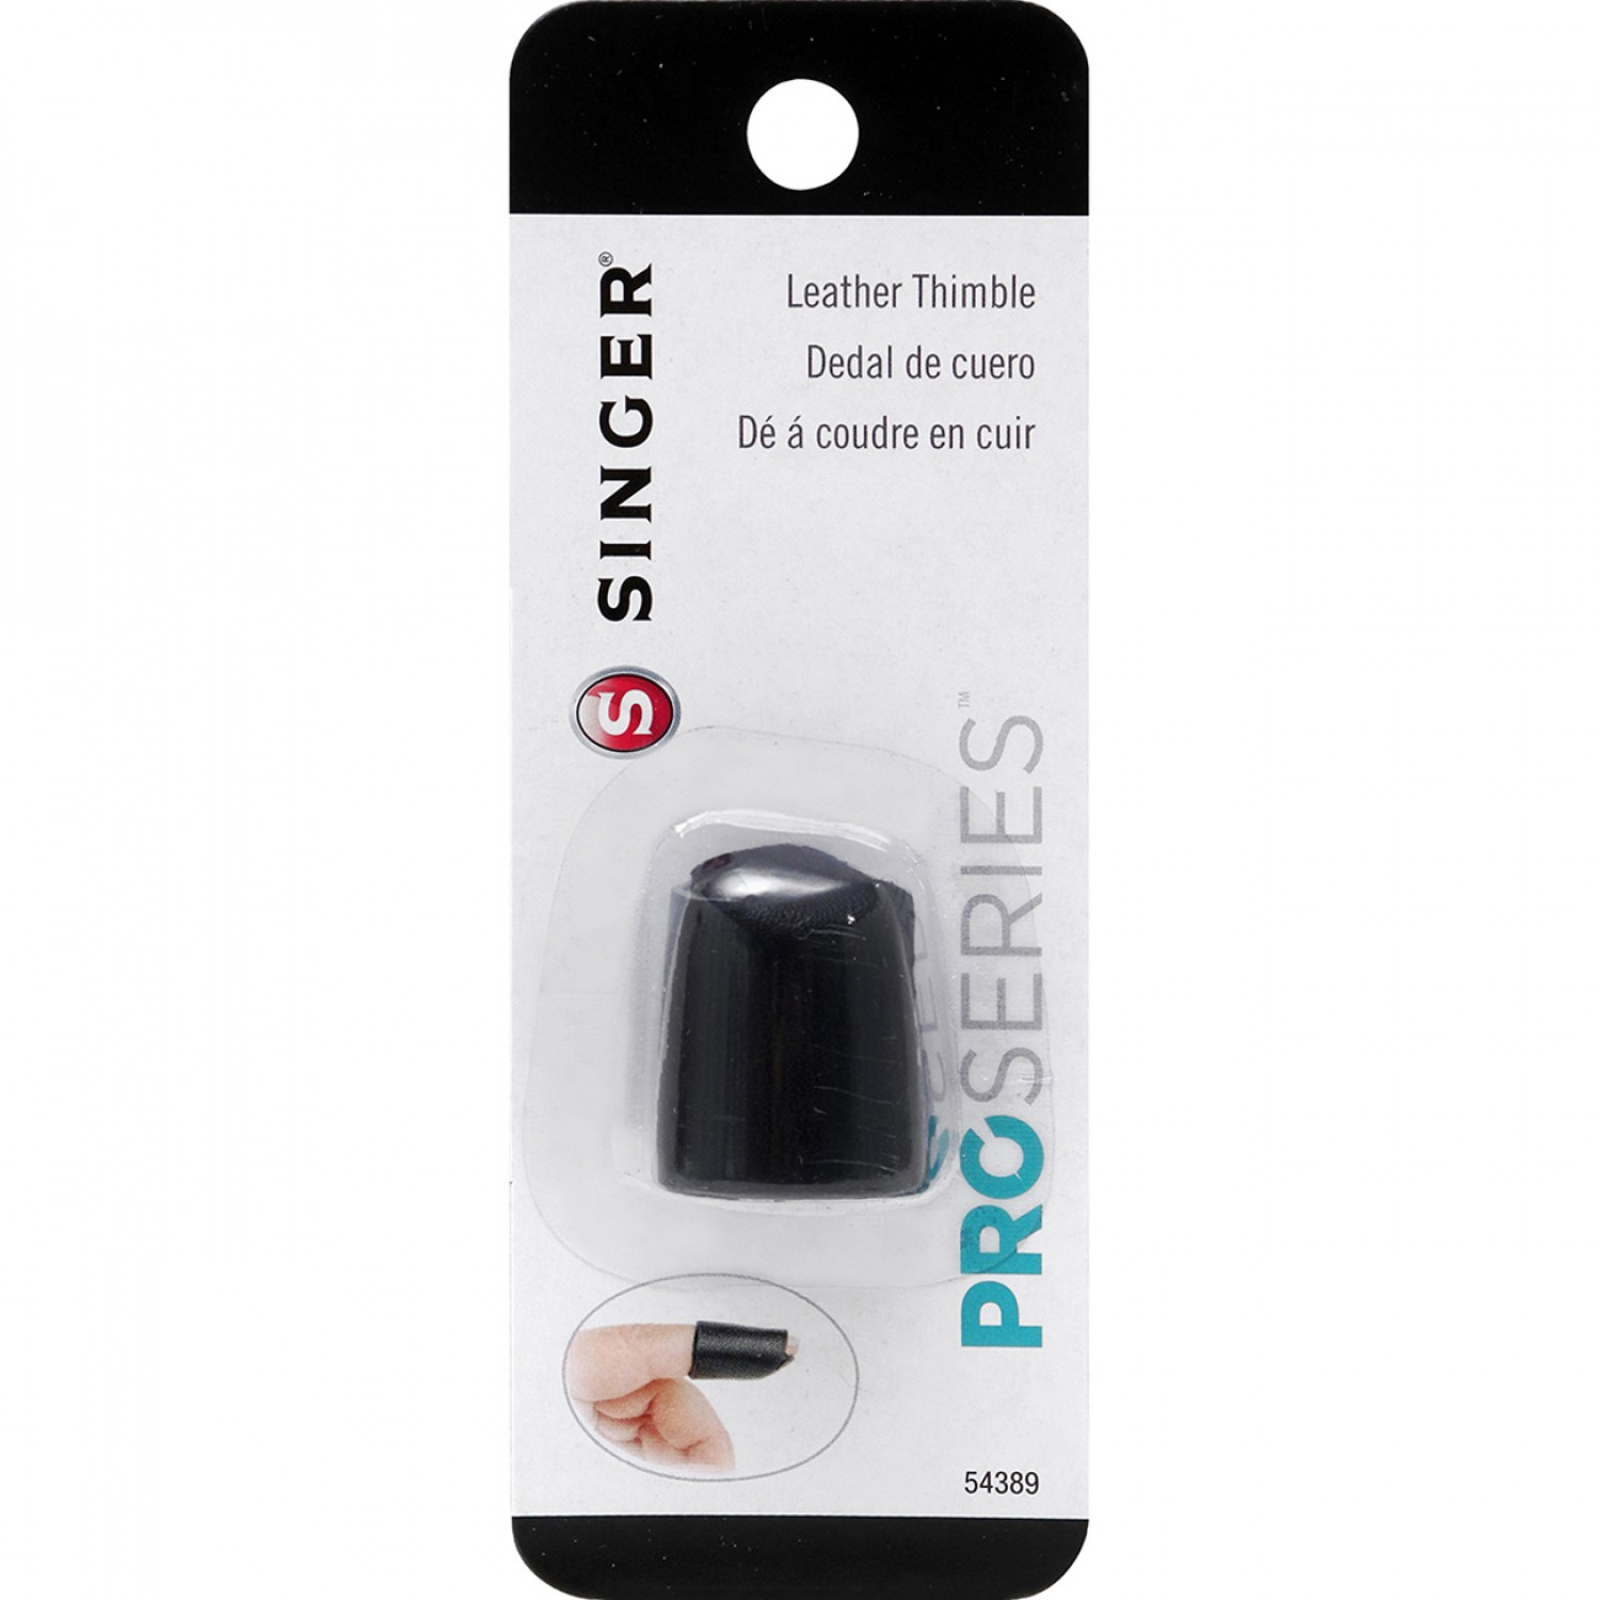 Singer ProSeries Leather Thimble 54389